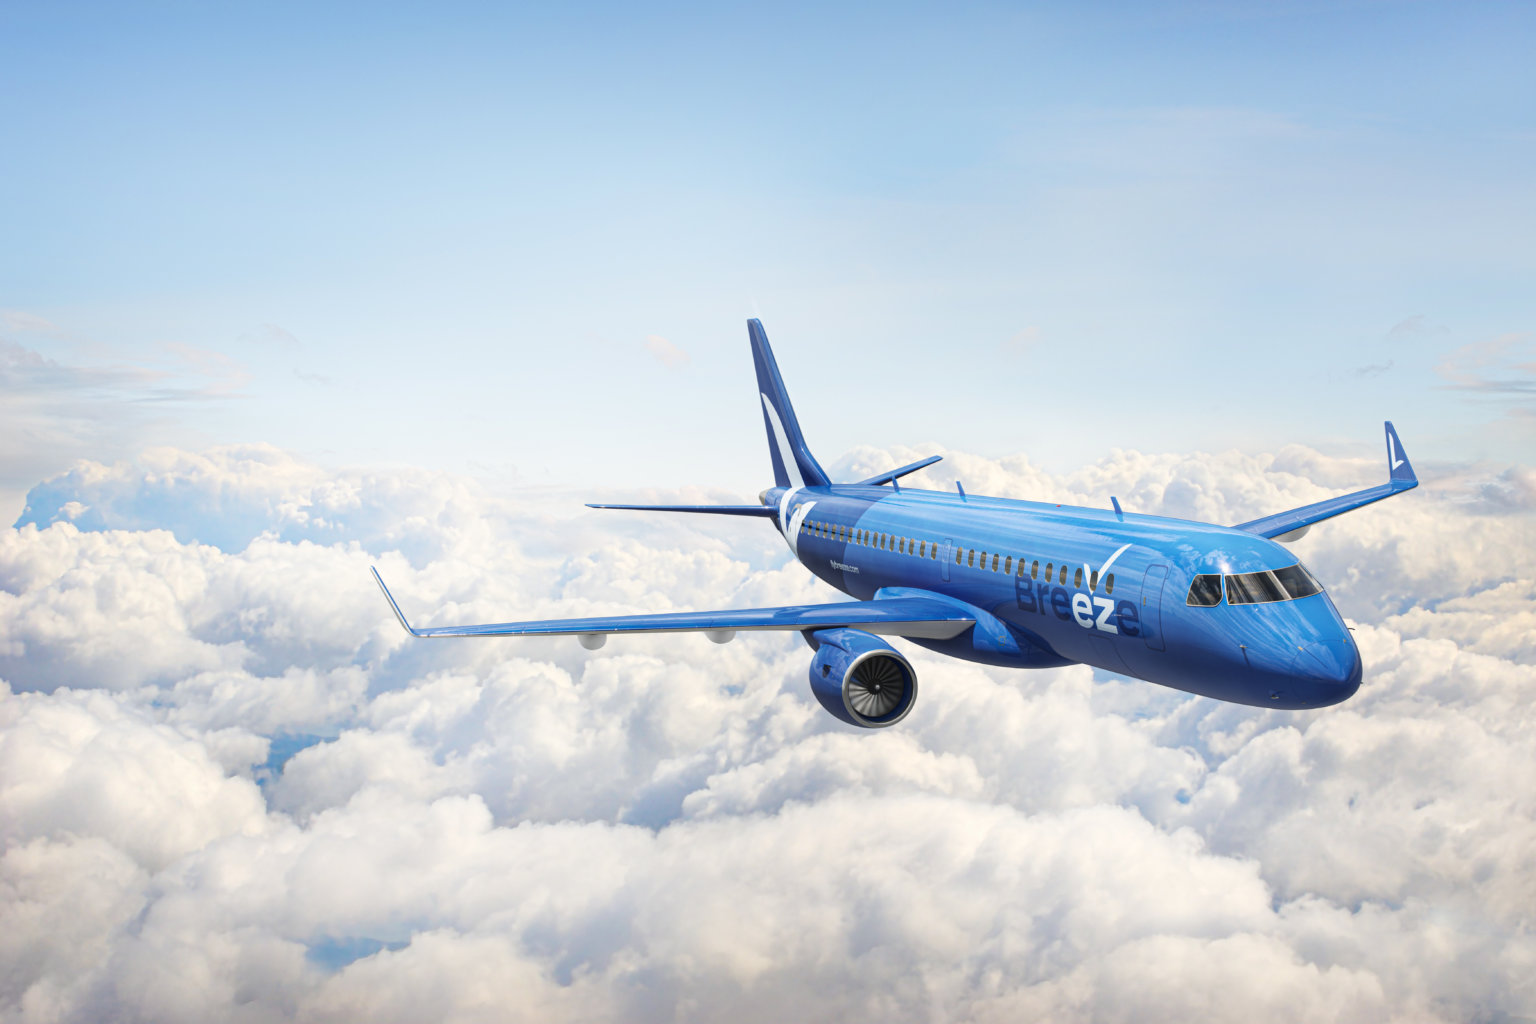 new airline breeze airways takes off